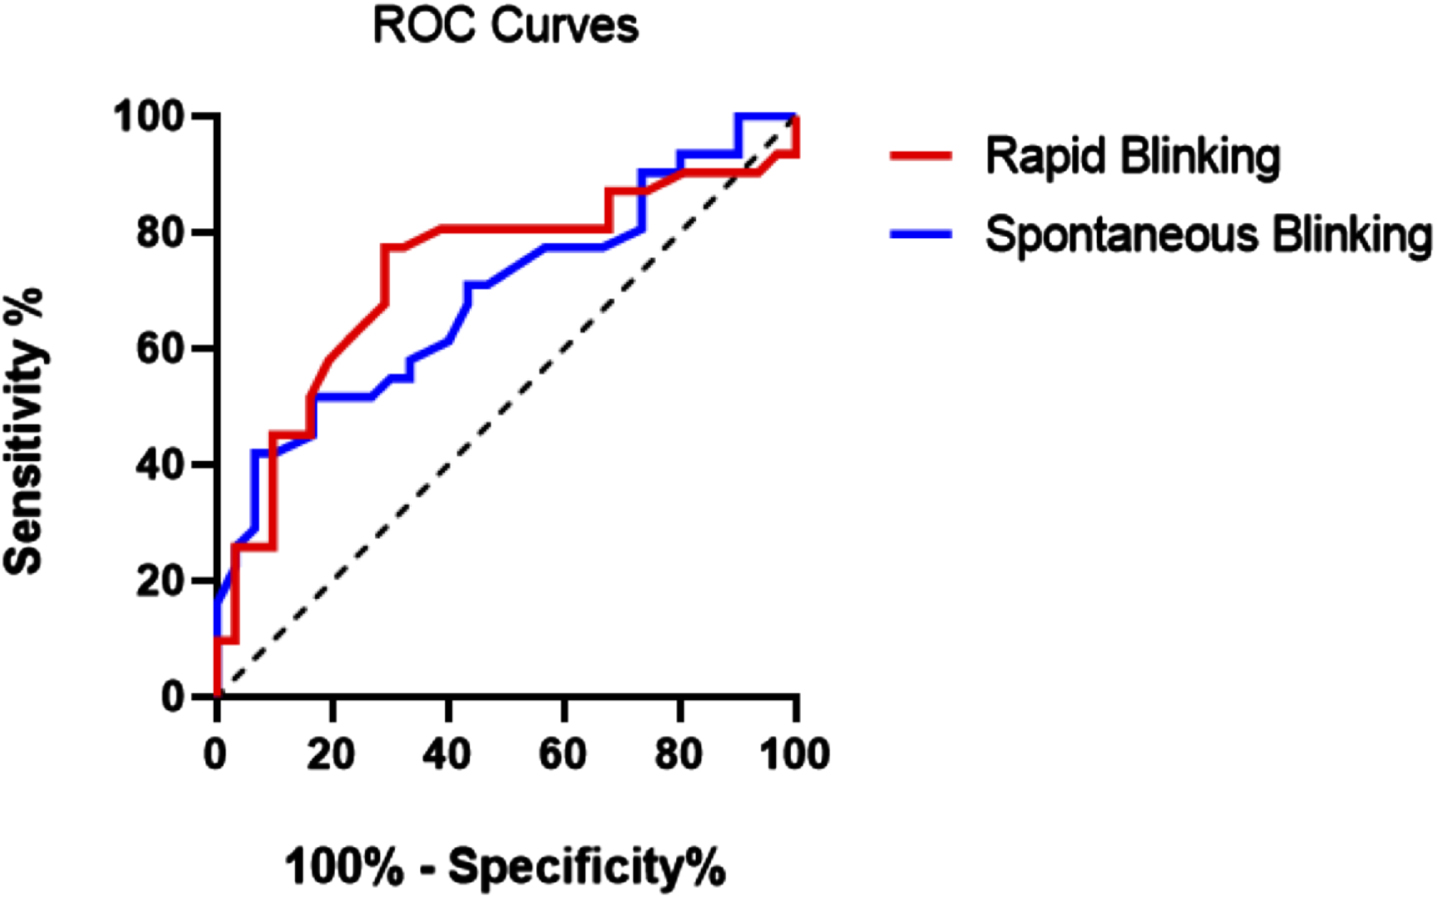 ROC curve of rapid blinking in red (AUC = 0.73, 95% CI 0.60–0.86) and spontaneous blinking in blue (AUC = 0.69, 95% CI 0.56–0.82).